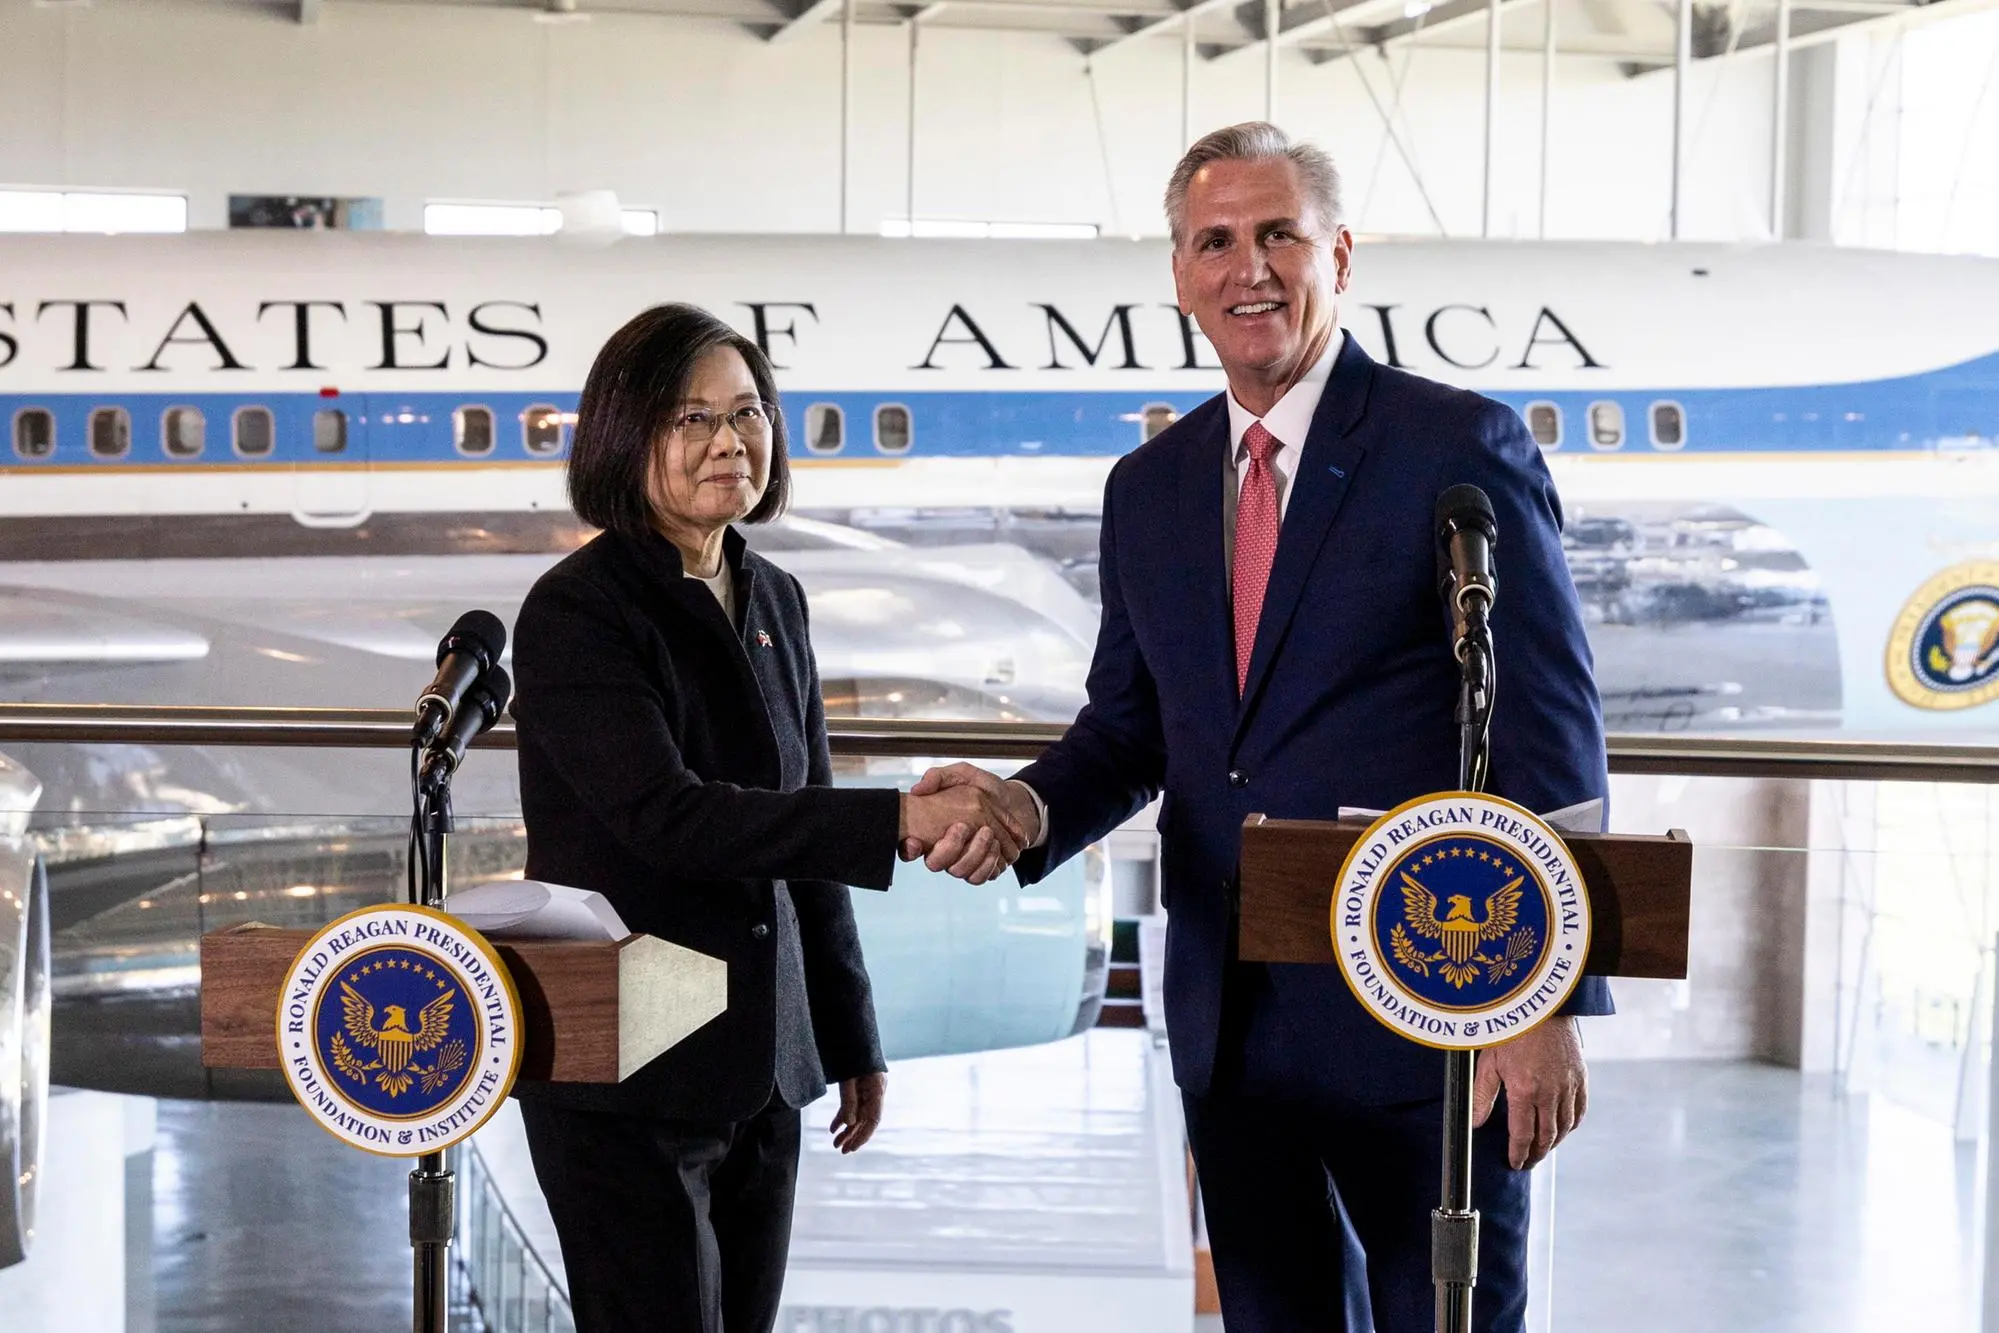 epa10560567 U.S. House speaker Kevin McCarthy (R) and Taiwanese President Tsai Ing-wen shake hands after holding a press conference following a bilateral meeting at the Ronald Reagan Presidential Library in Simi Valley, California, USA, 05 April 2023. This meeting takes place amid rising tension between the United States and China, as well as between China and Taiwan. EPA/ETIENNE LAURENT